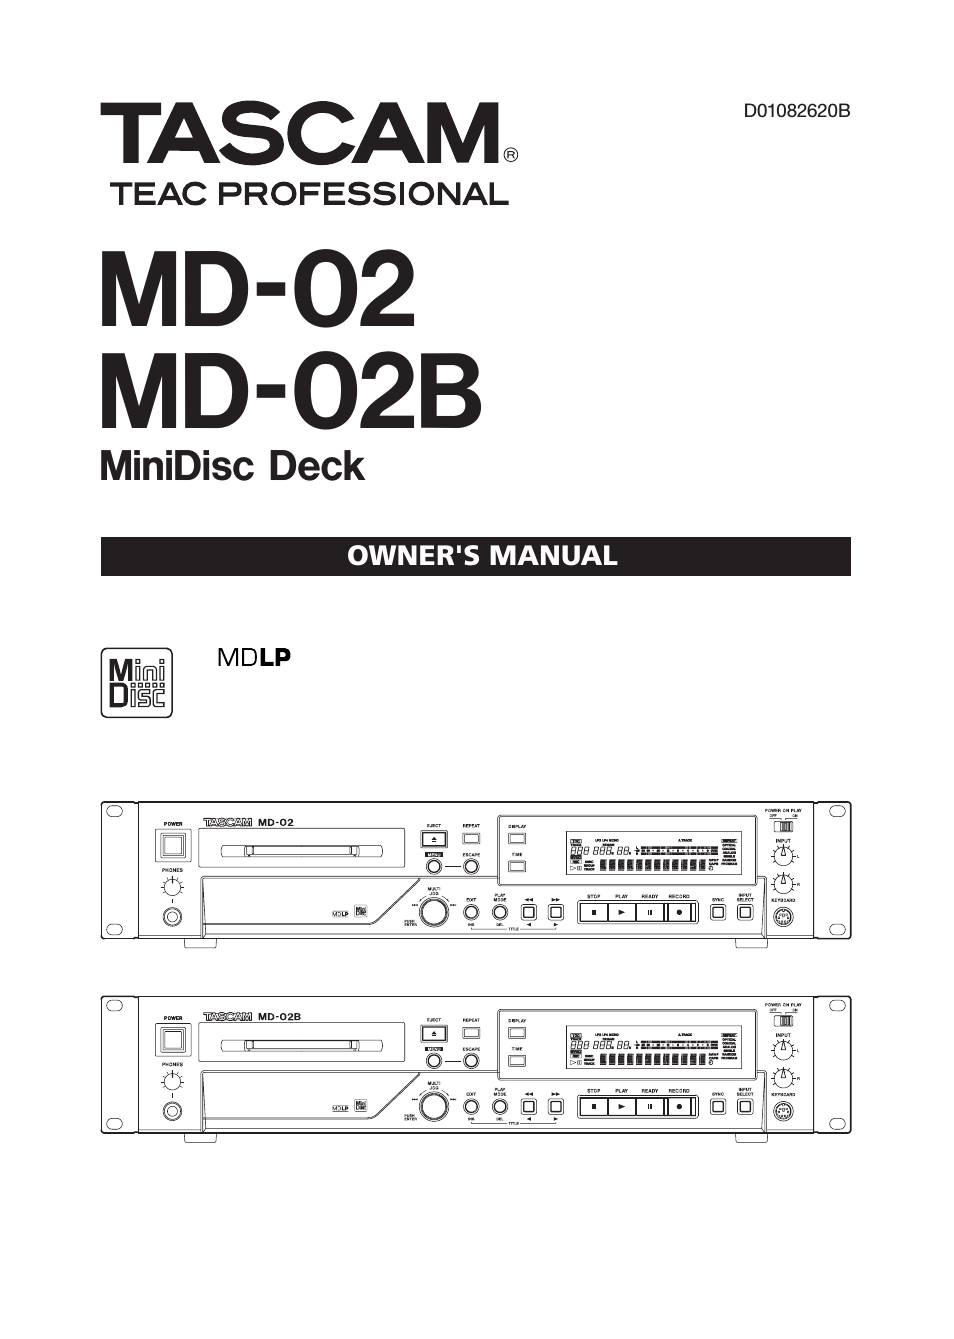 MD-02